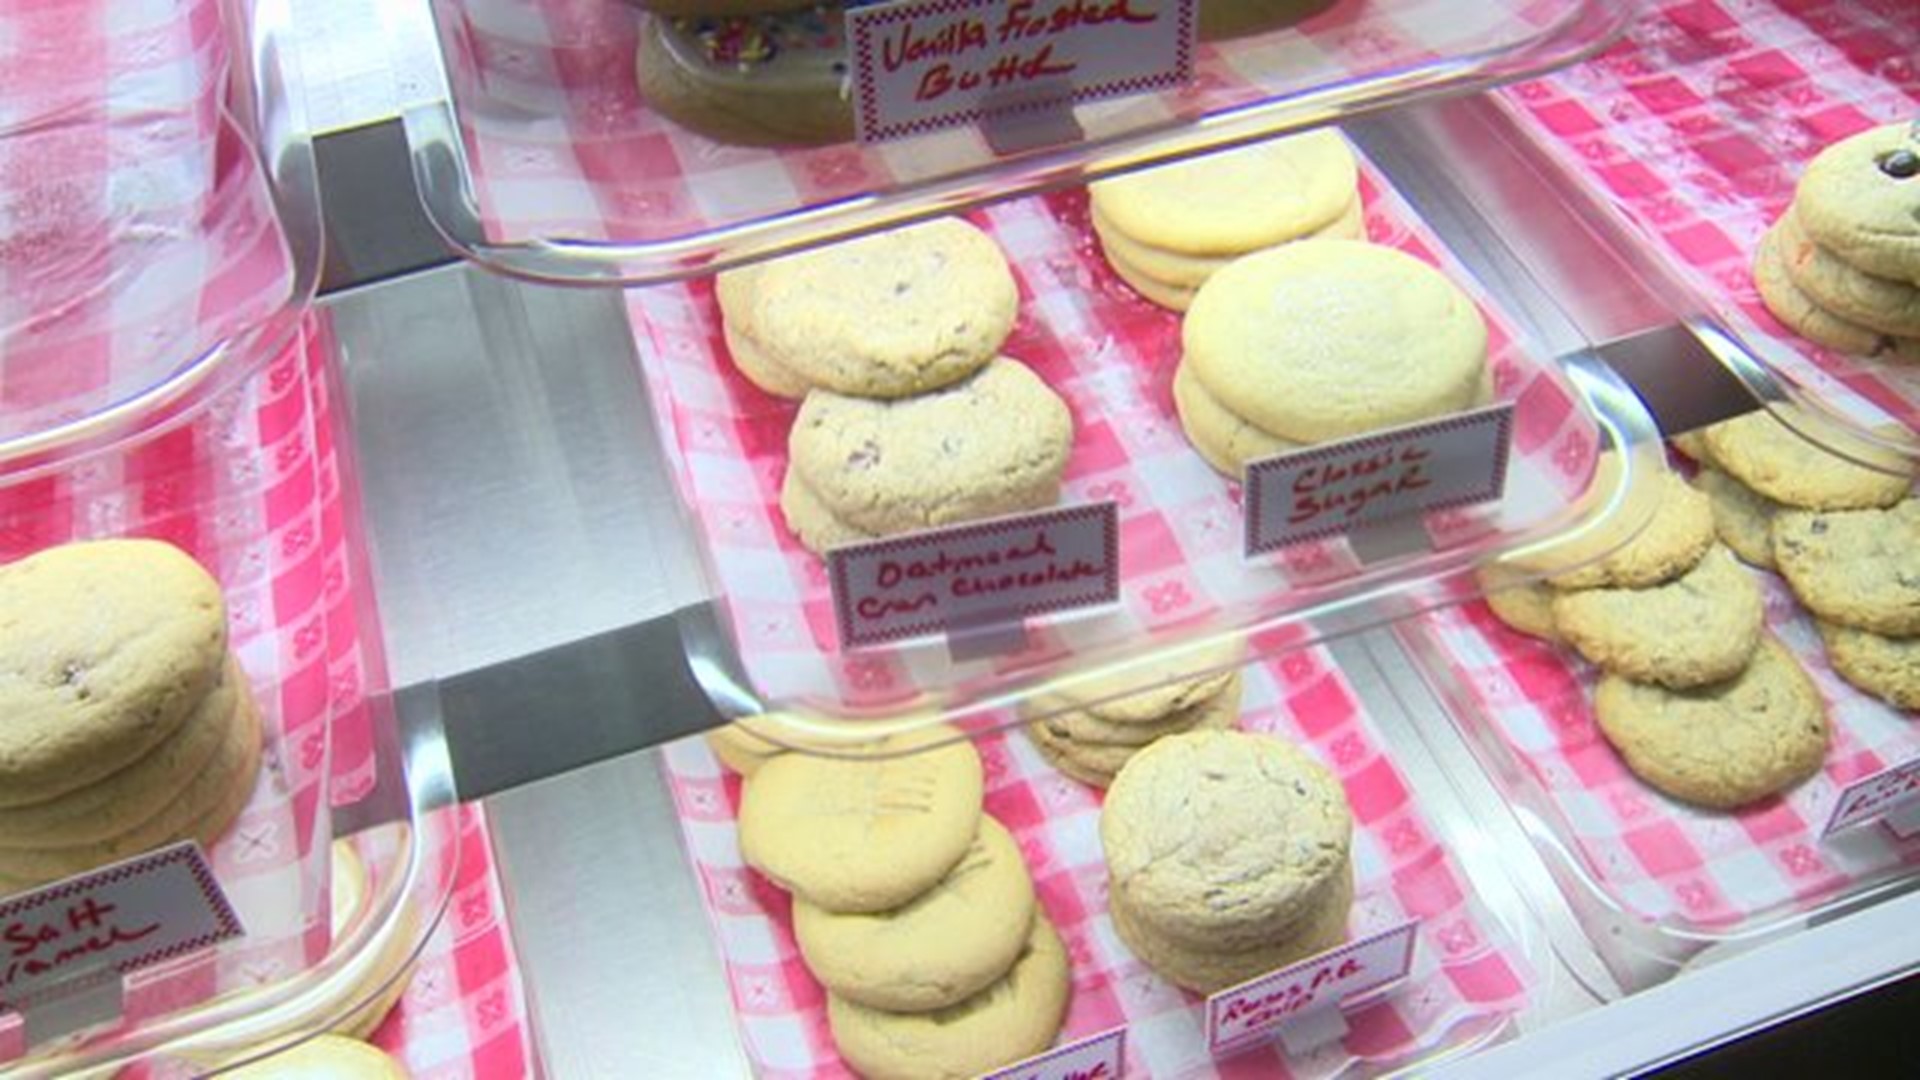 Foodie Friday: Red Rooster Bakery